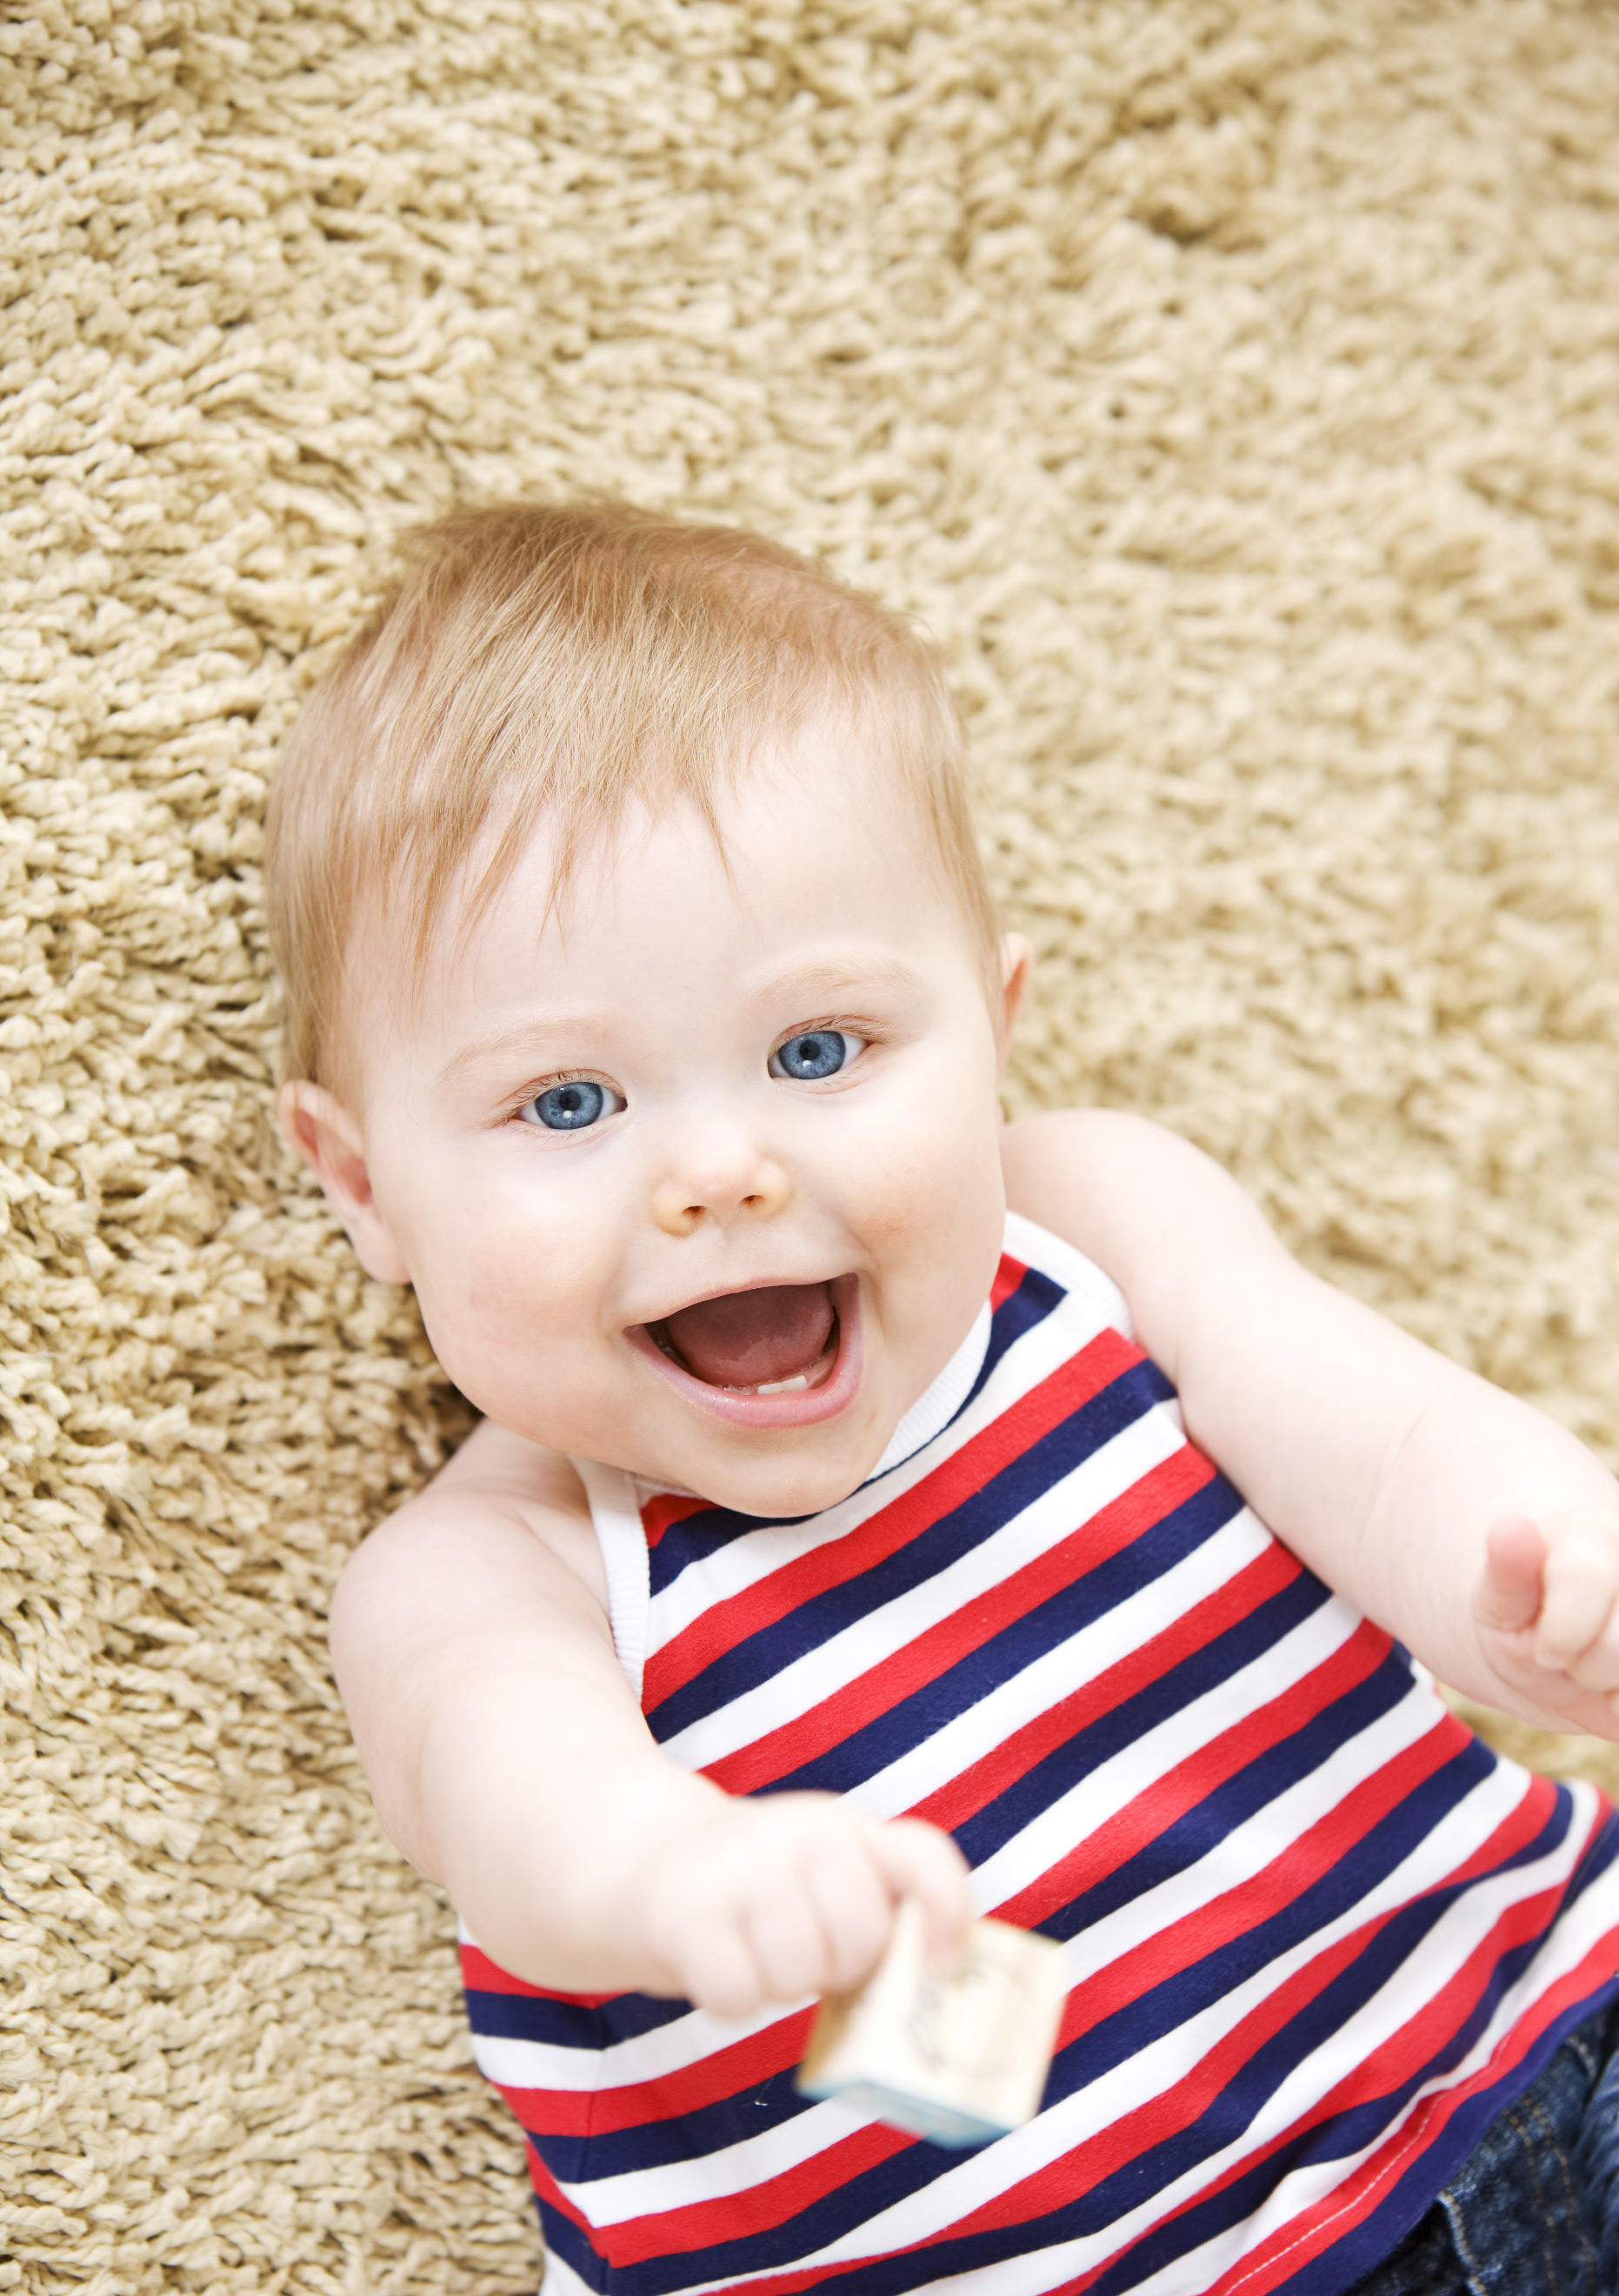 Little crawlers are in close contact with the carpet in your home. A regular carpet cleaning keeps your indoor air quality up to standard and keeps your baby healthy! Our cleaning products are safe and gentle for the babies in your family.